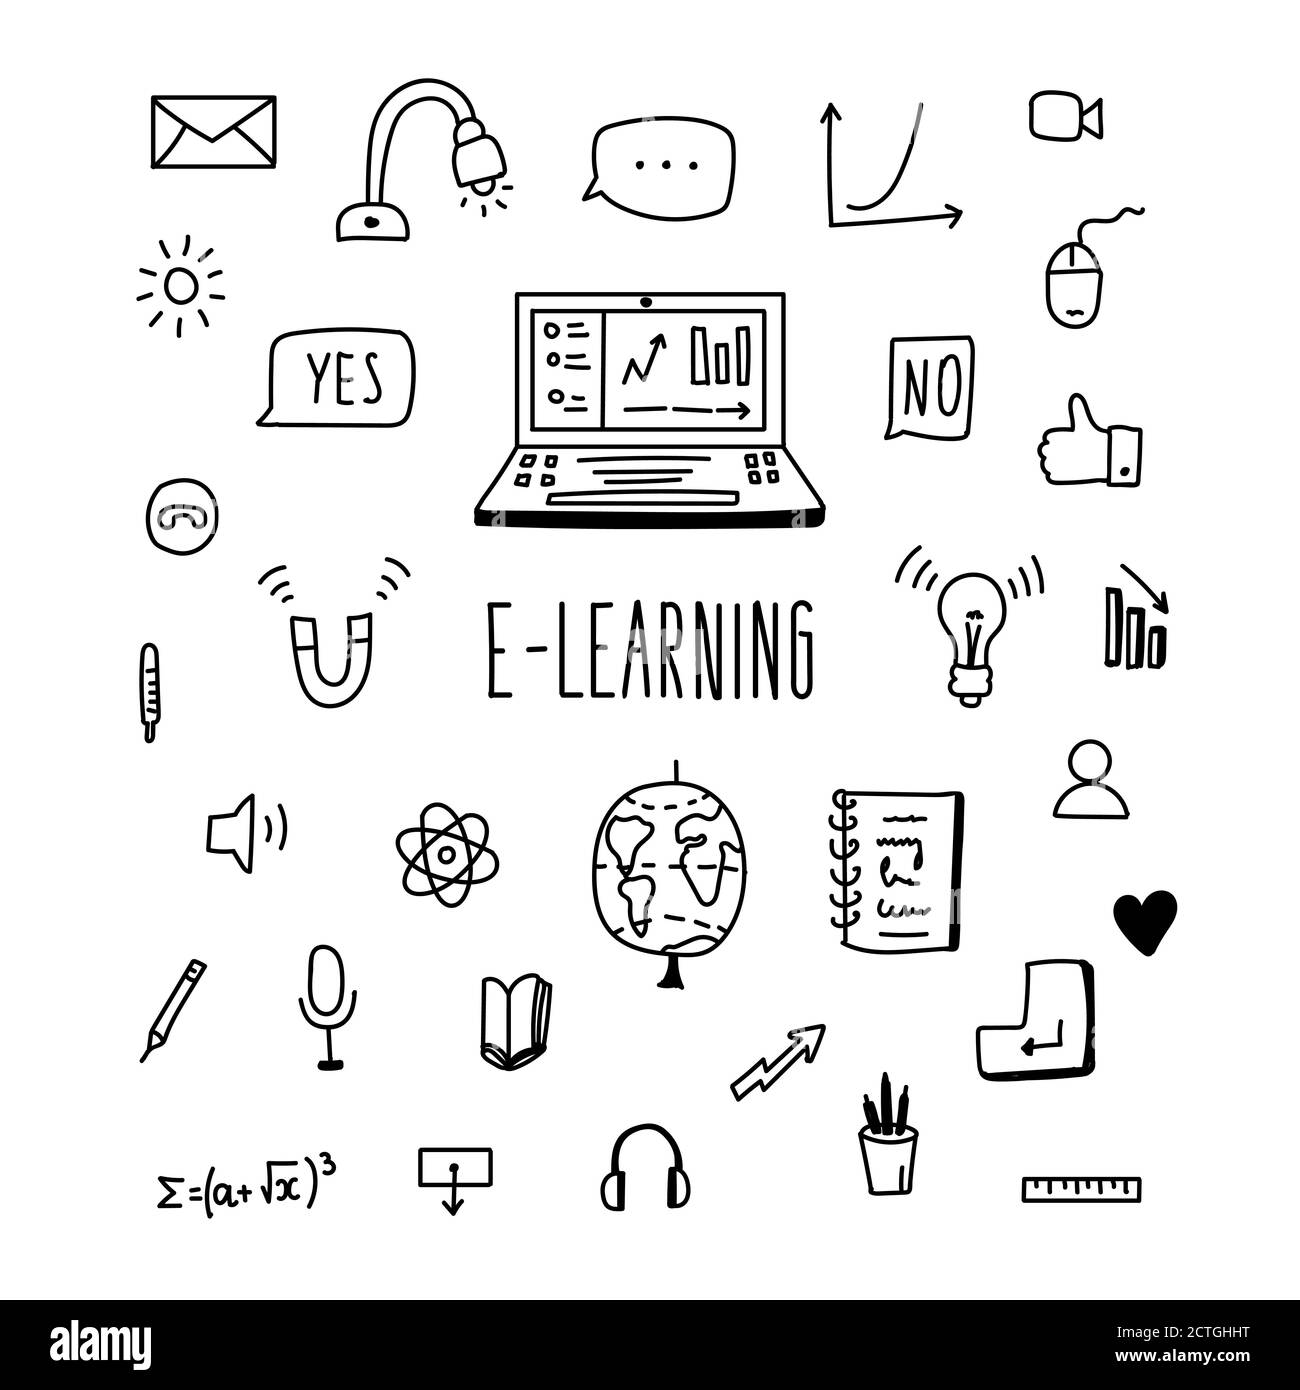 lettering and doodle education, e-learning icons online formation, computer, globe, divider, lamp, headphones, formula, speech bubble, message, magnet Stock Vector